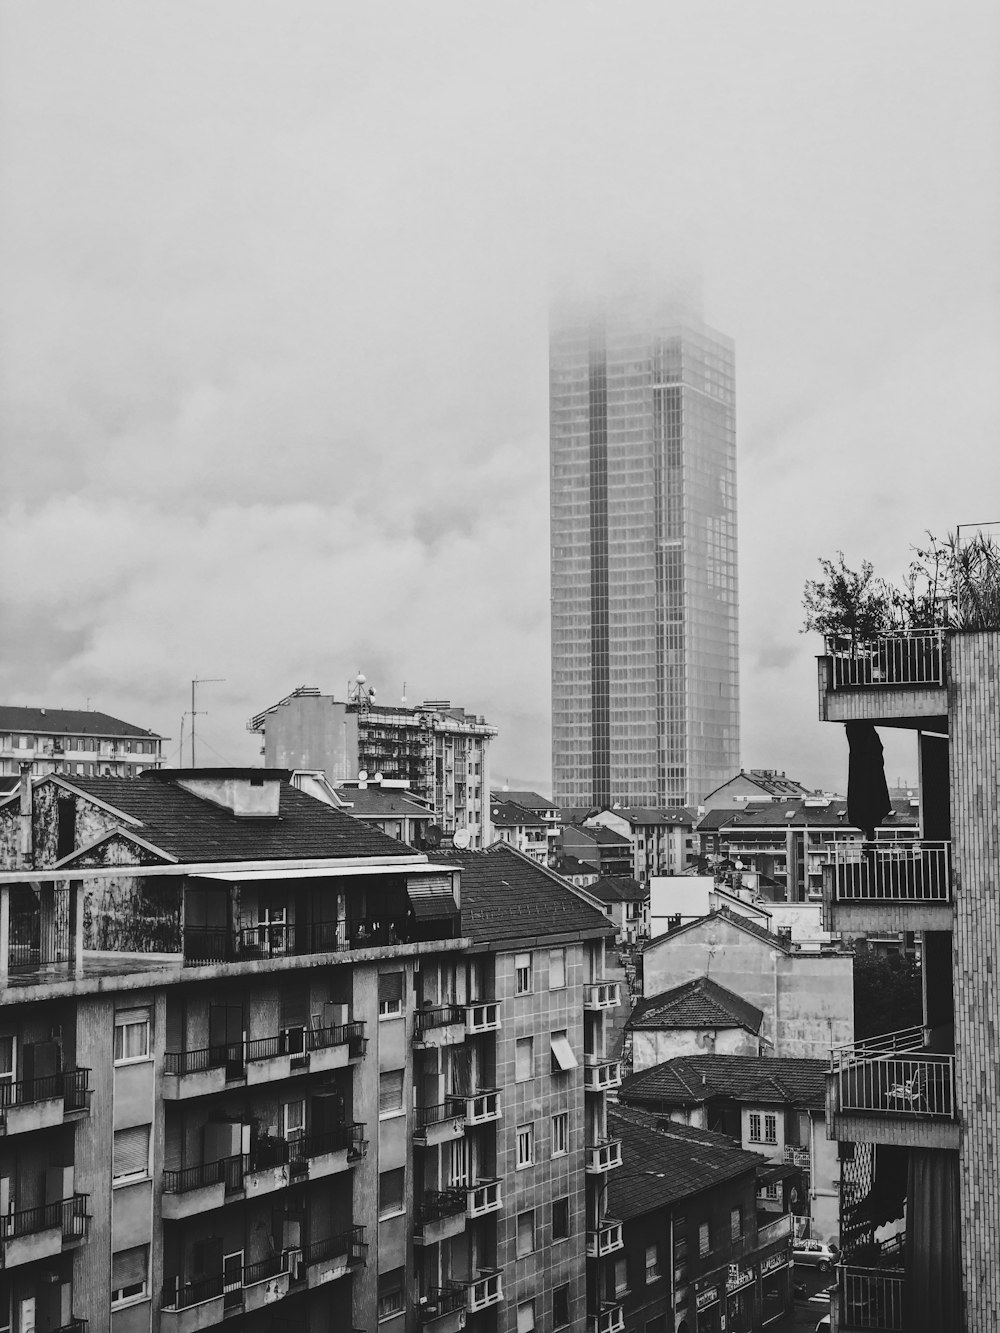 grayscale photography of city with high-rise buildings and houses